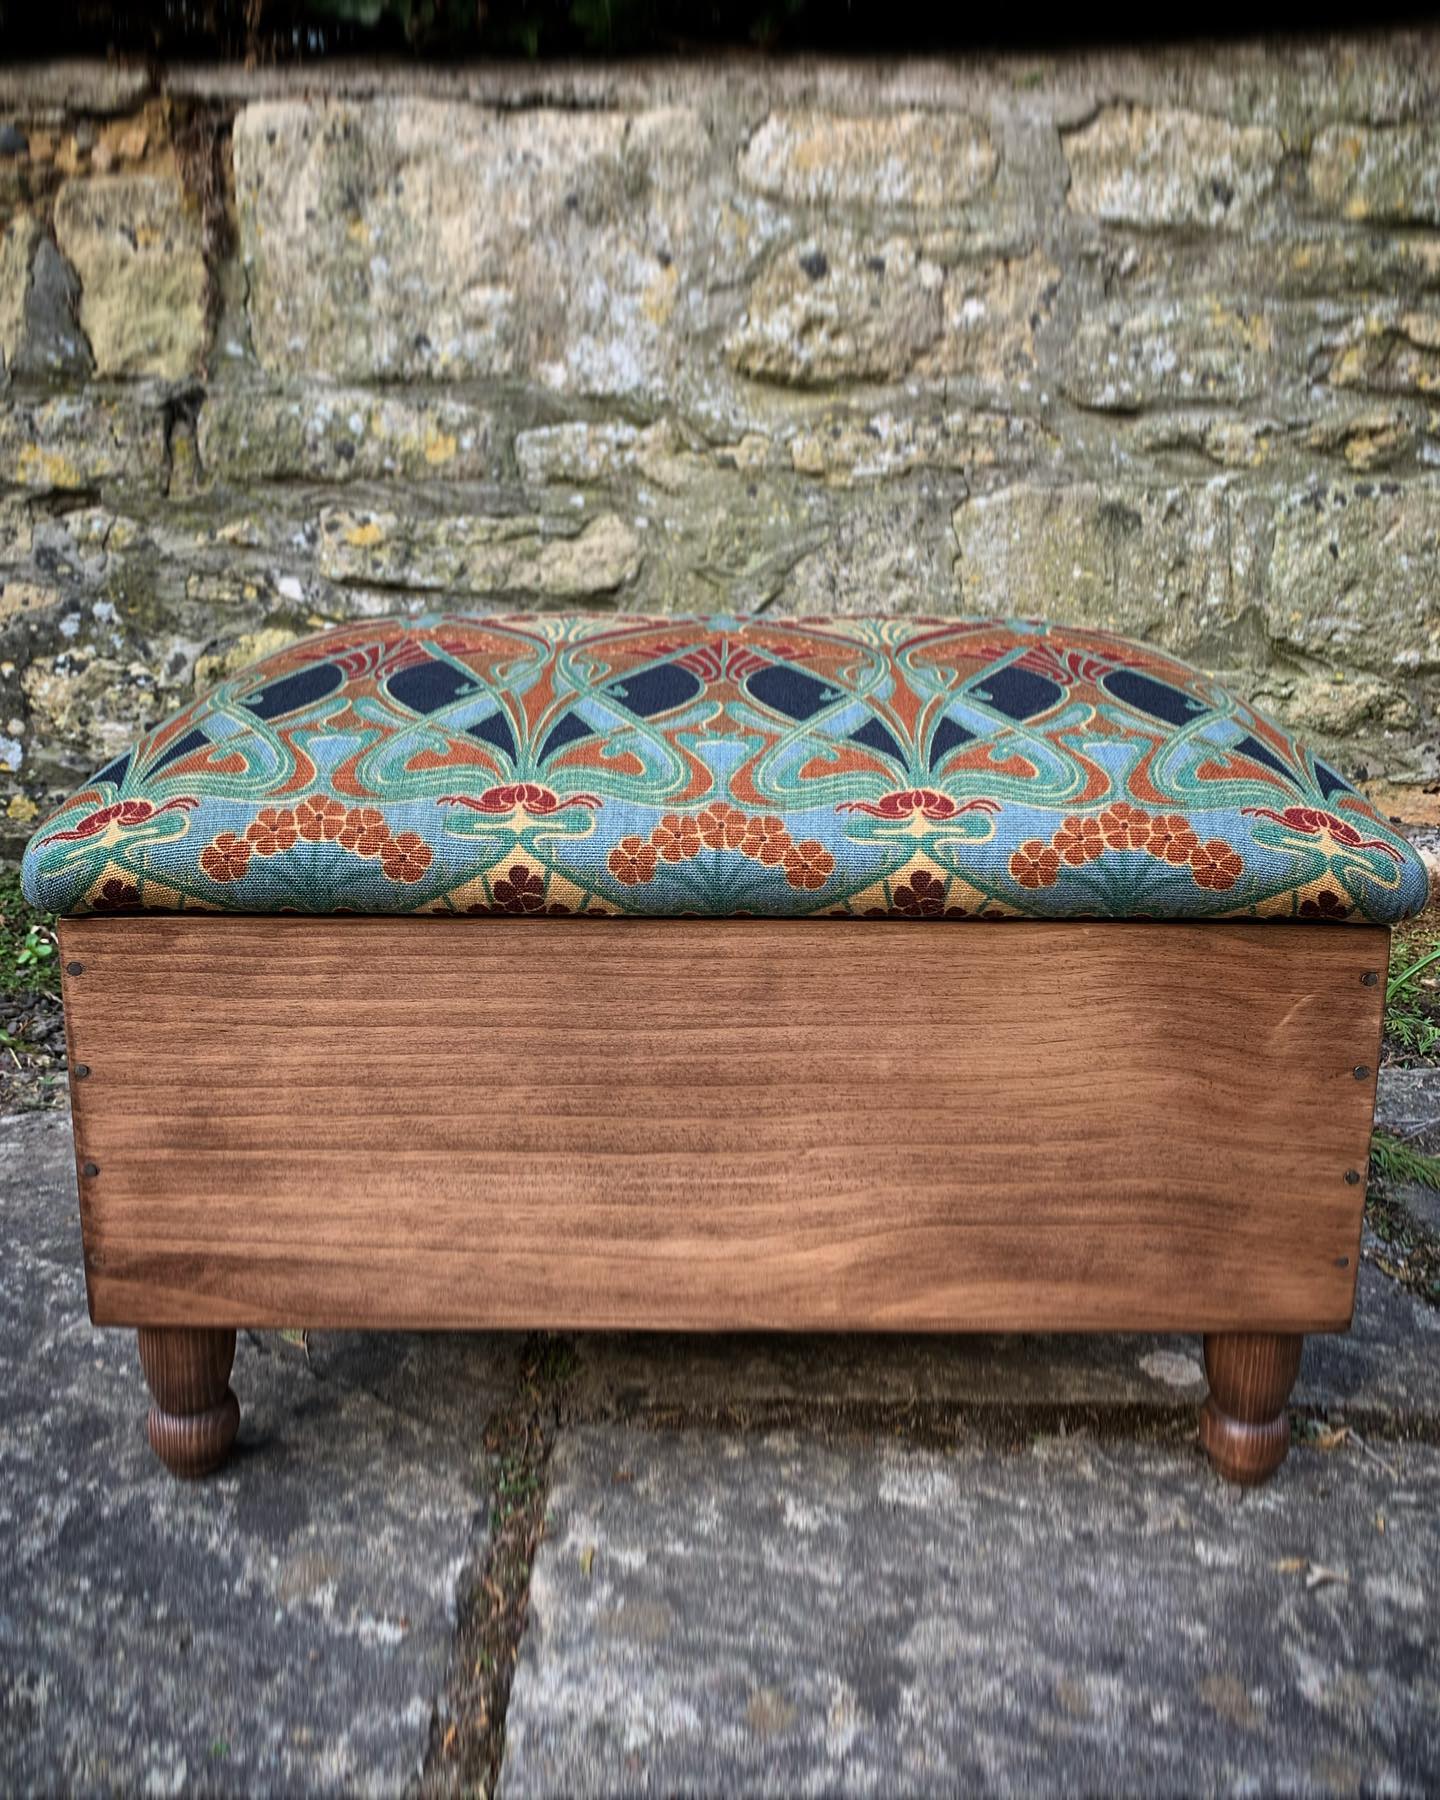 Finished his lovely ottoman today ready for tomorrows @clevedonsundaymarket See you in the morning clevedon! If you’re heading to the market? You can find us at the end of Hill Road next to @birdsmithjewellery